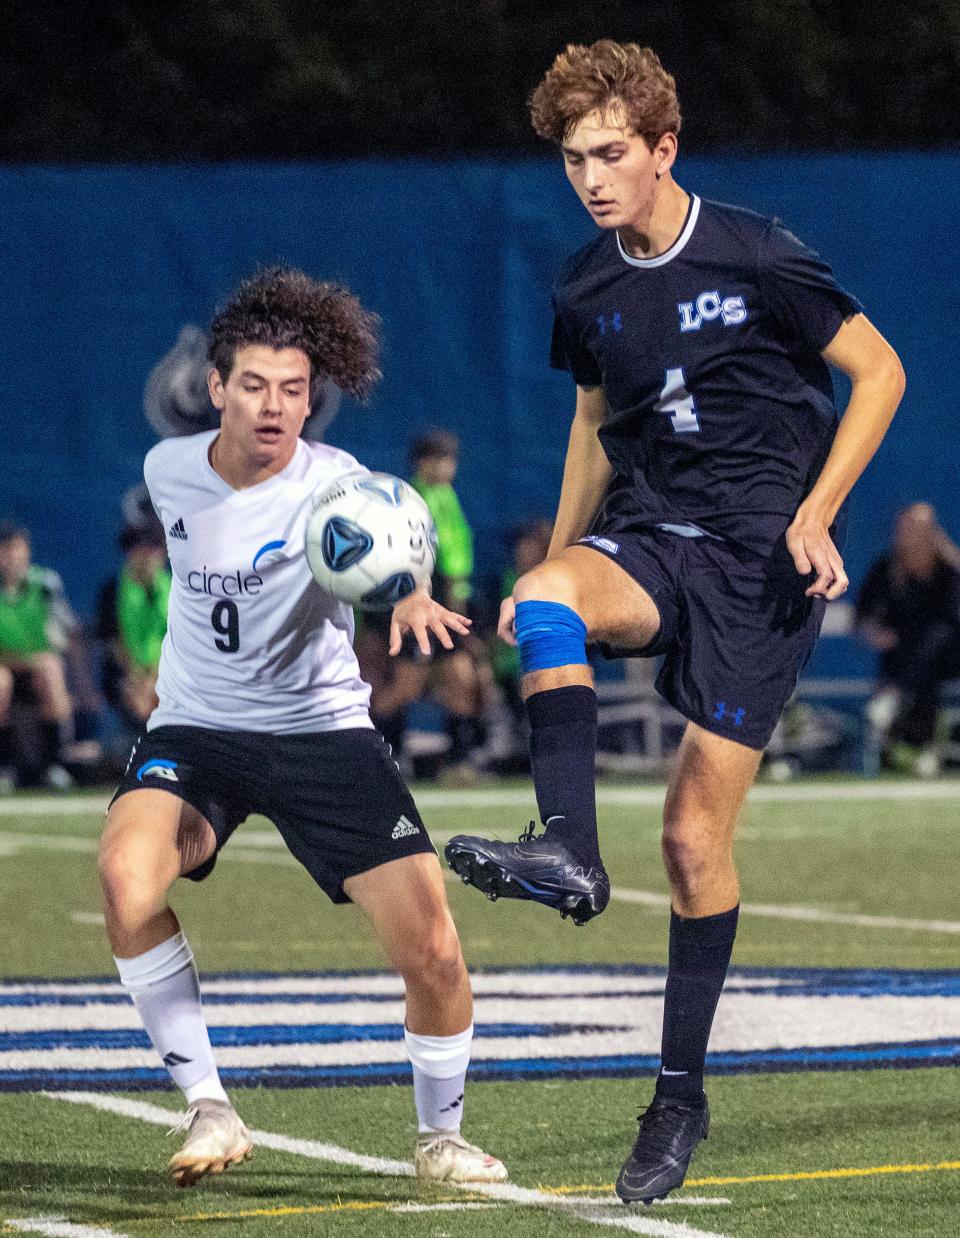 Lakeland Christian's Henry Strawbridge controls the ball in front of Circle Christian's Micaiah Smith on Friday night in the Class 2A, Region 7 semifinals at Viking Stadium.